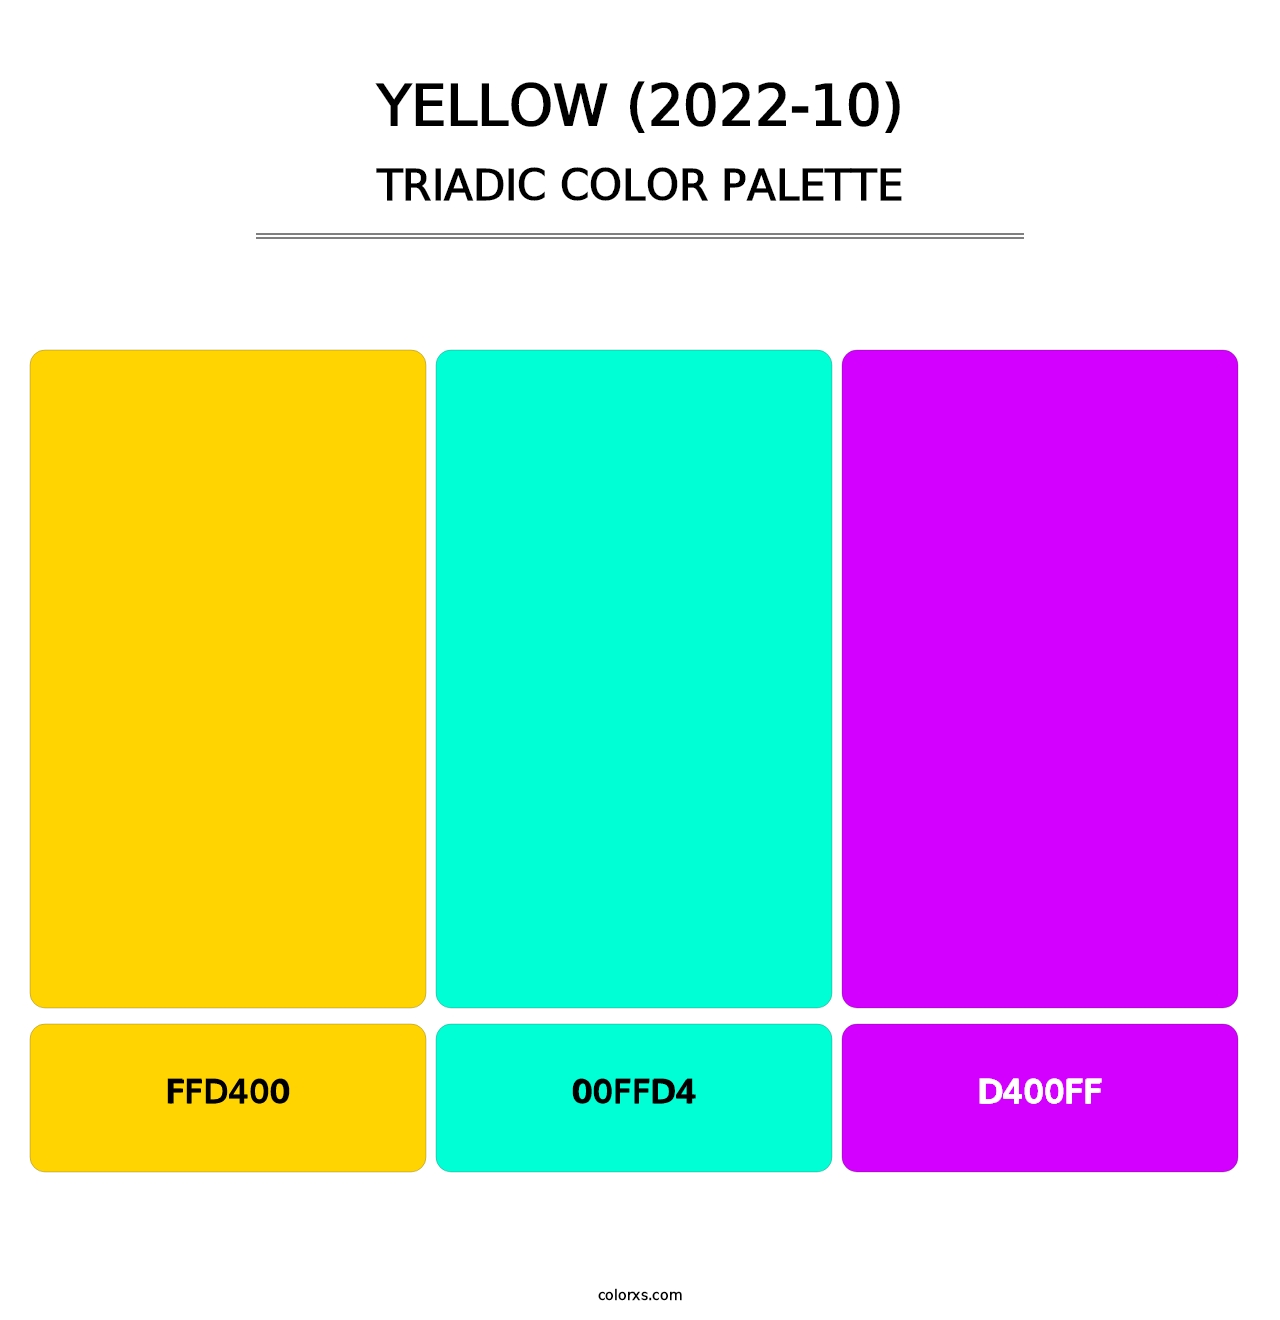 Yellow (2022-10) - Triadic Color Palette